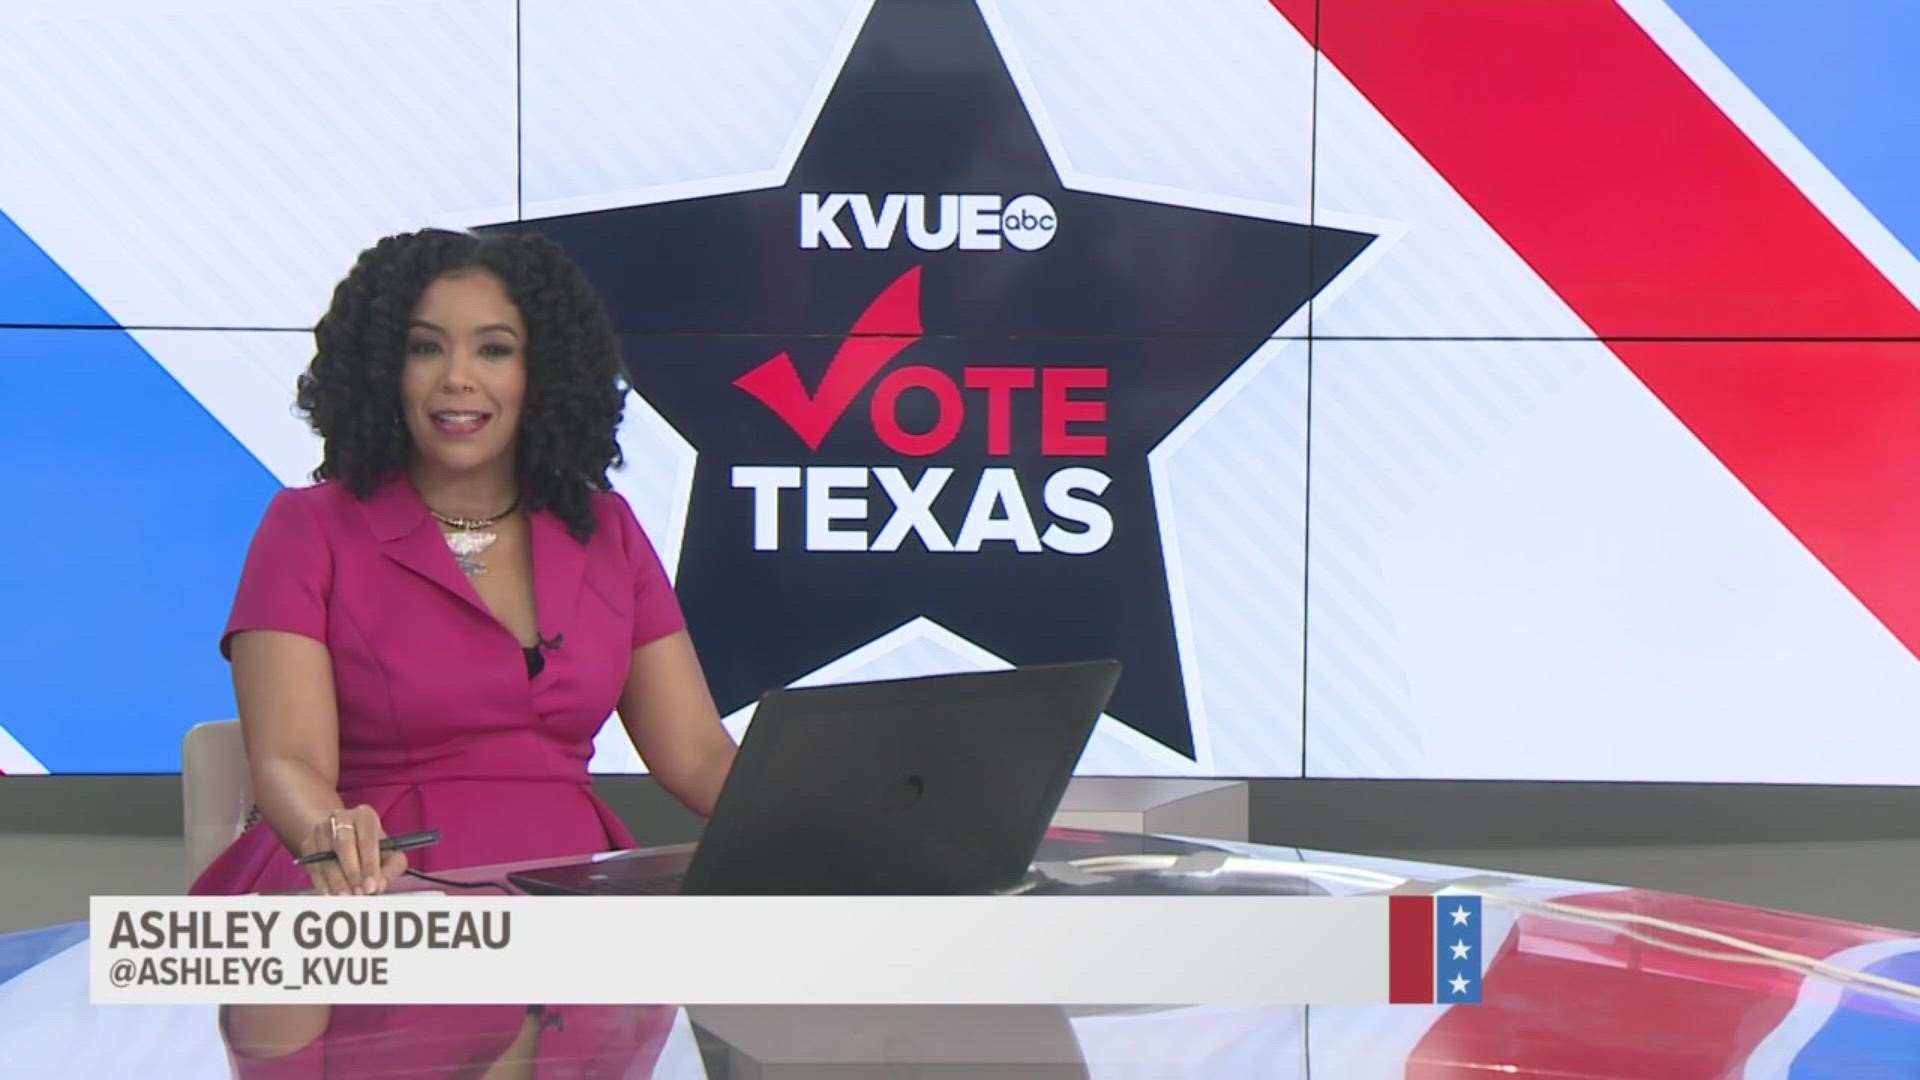 KVUE hosted a debate between the U.S. Senate Democratic candidates competing in the July runoff election for a chance to face incumbent Republican Sen. John Cornyn.